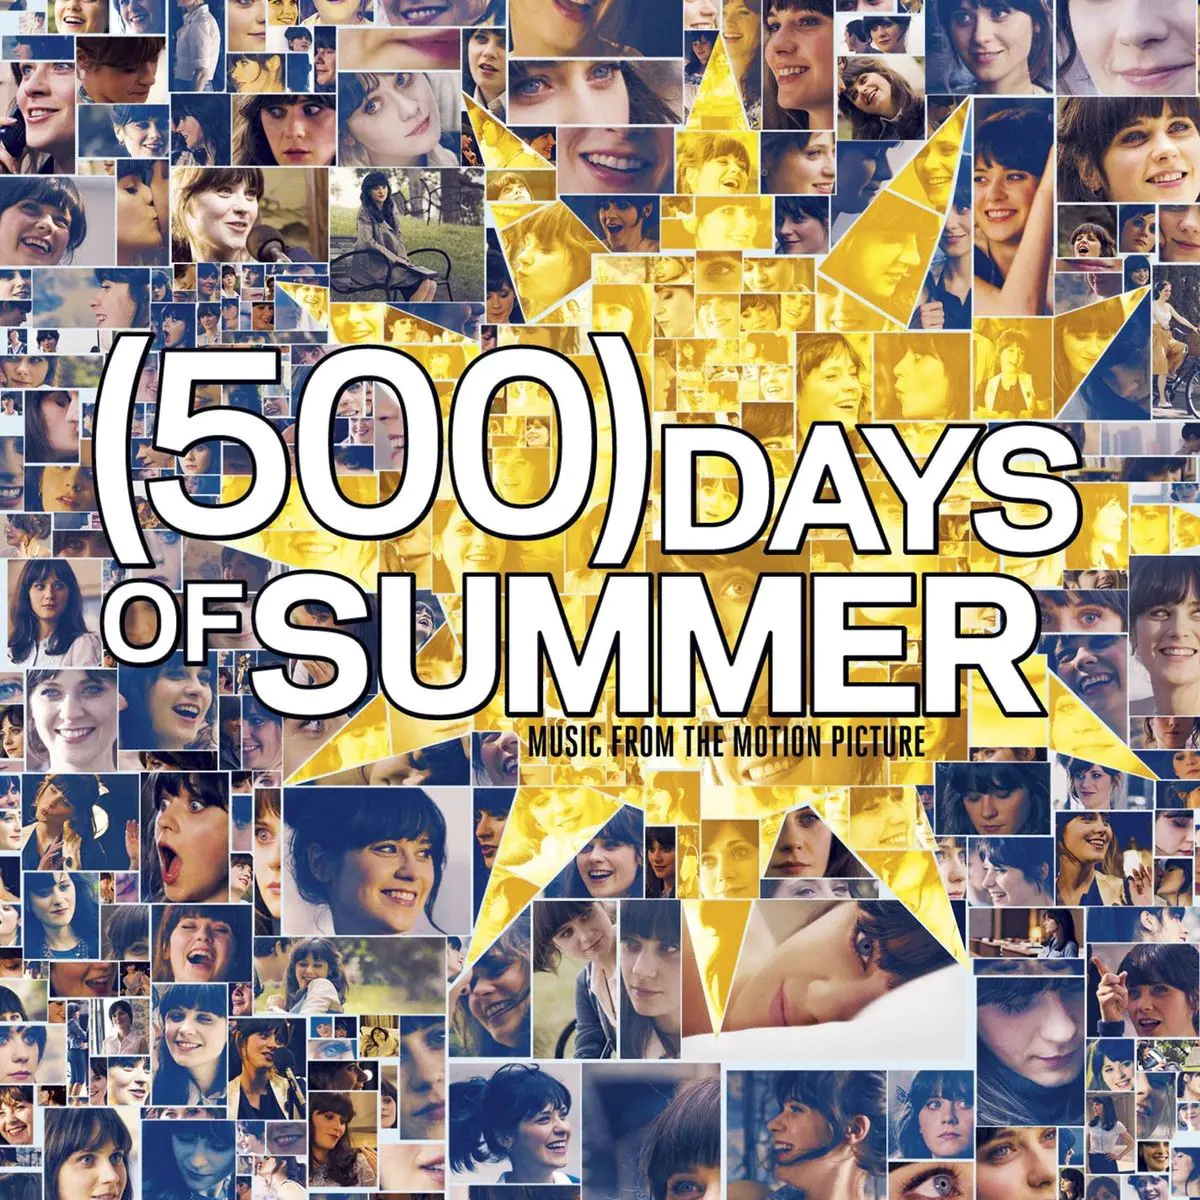 Download 500 Days Of Summer Music From The Motion Picture Songs Download 500 Days Of Summer Music From The Motion Picture Mp3 Songs Online Free On Gaana Com